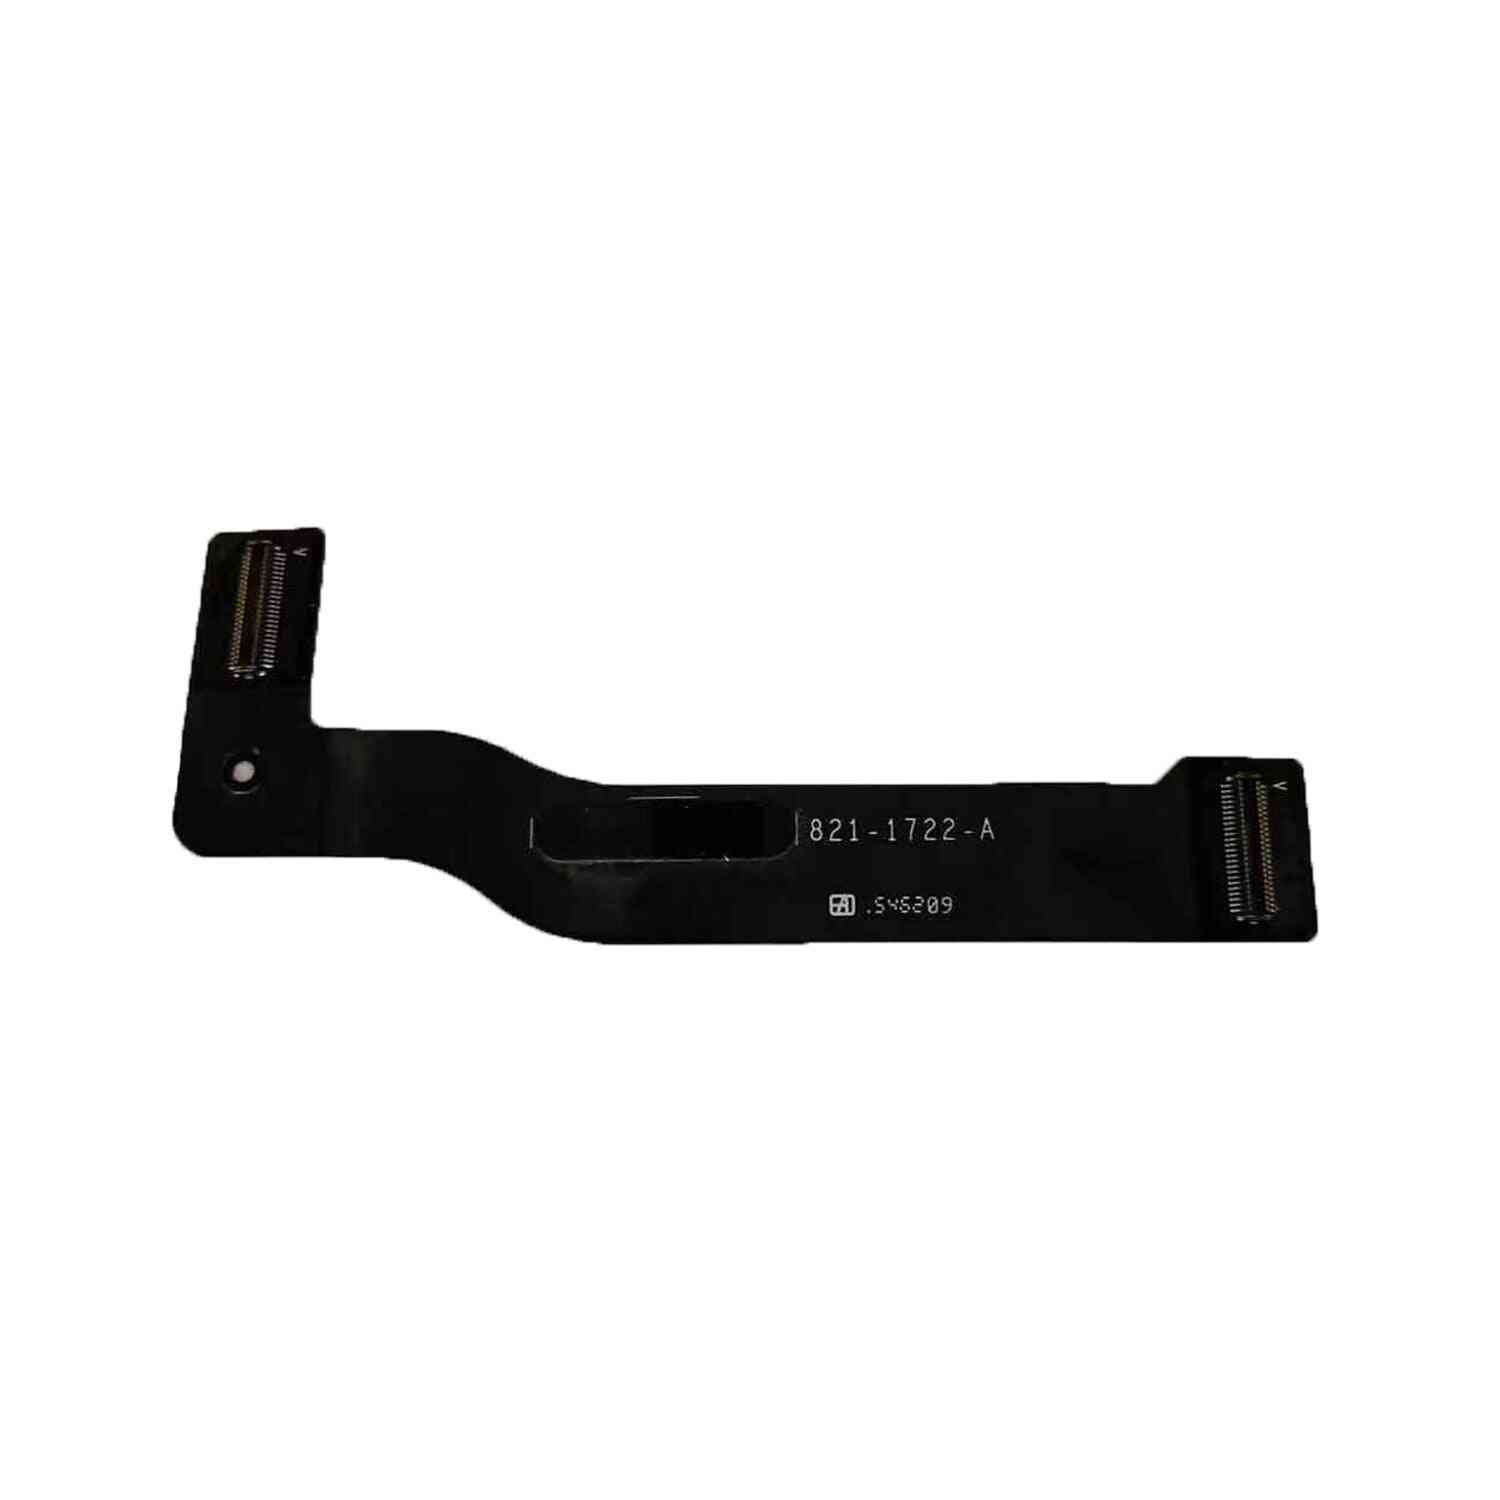 Audio Power Board Flex Cable For Macbook Air.